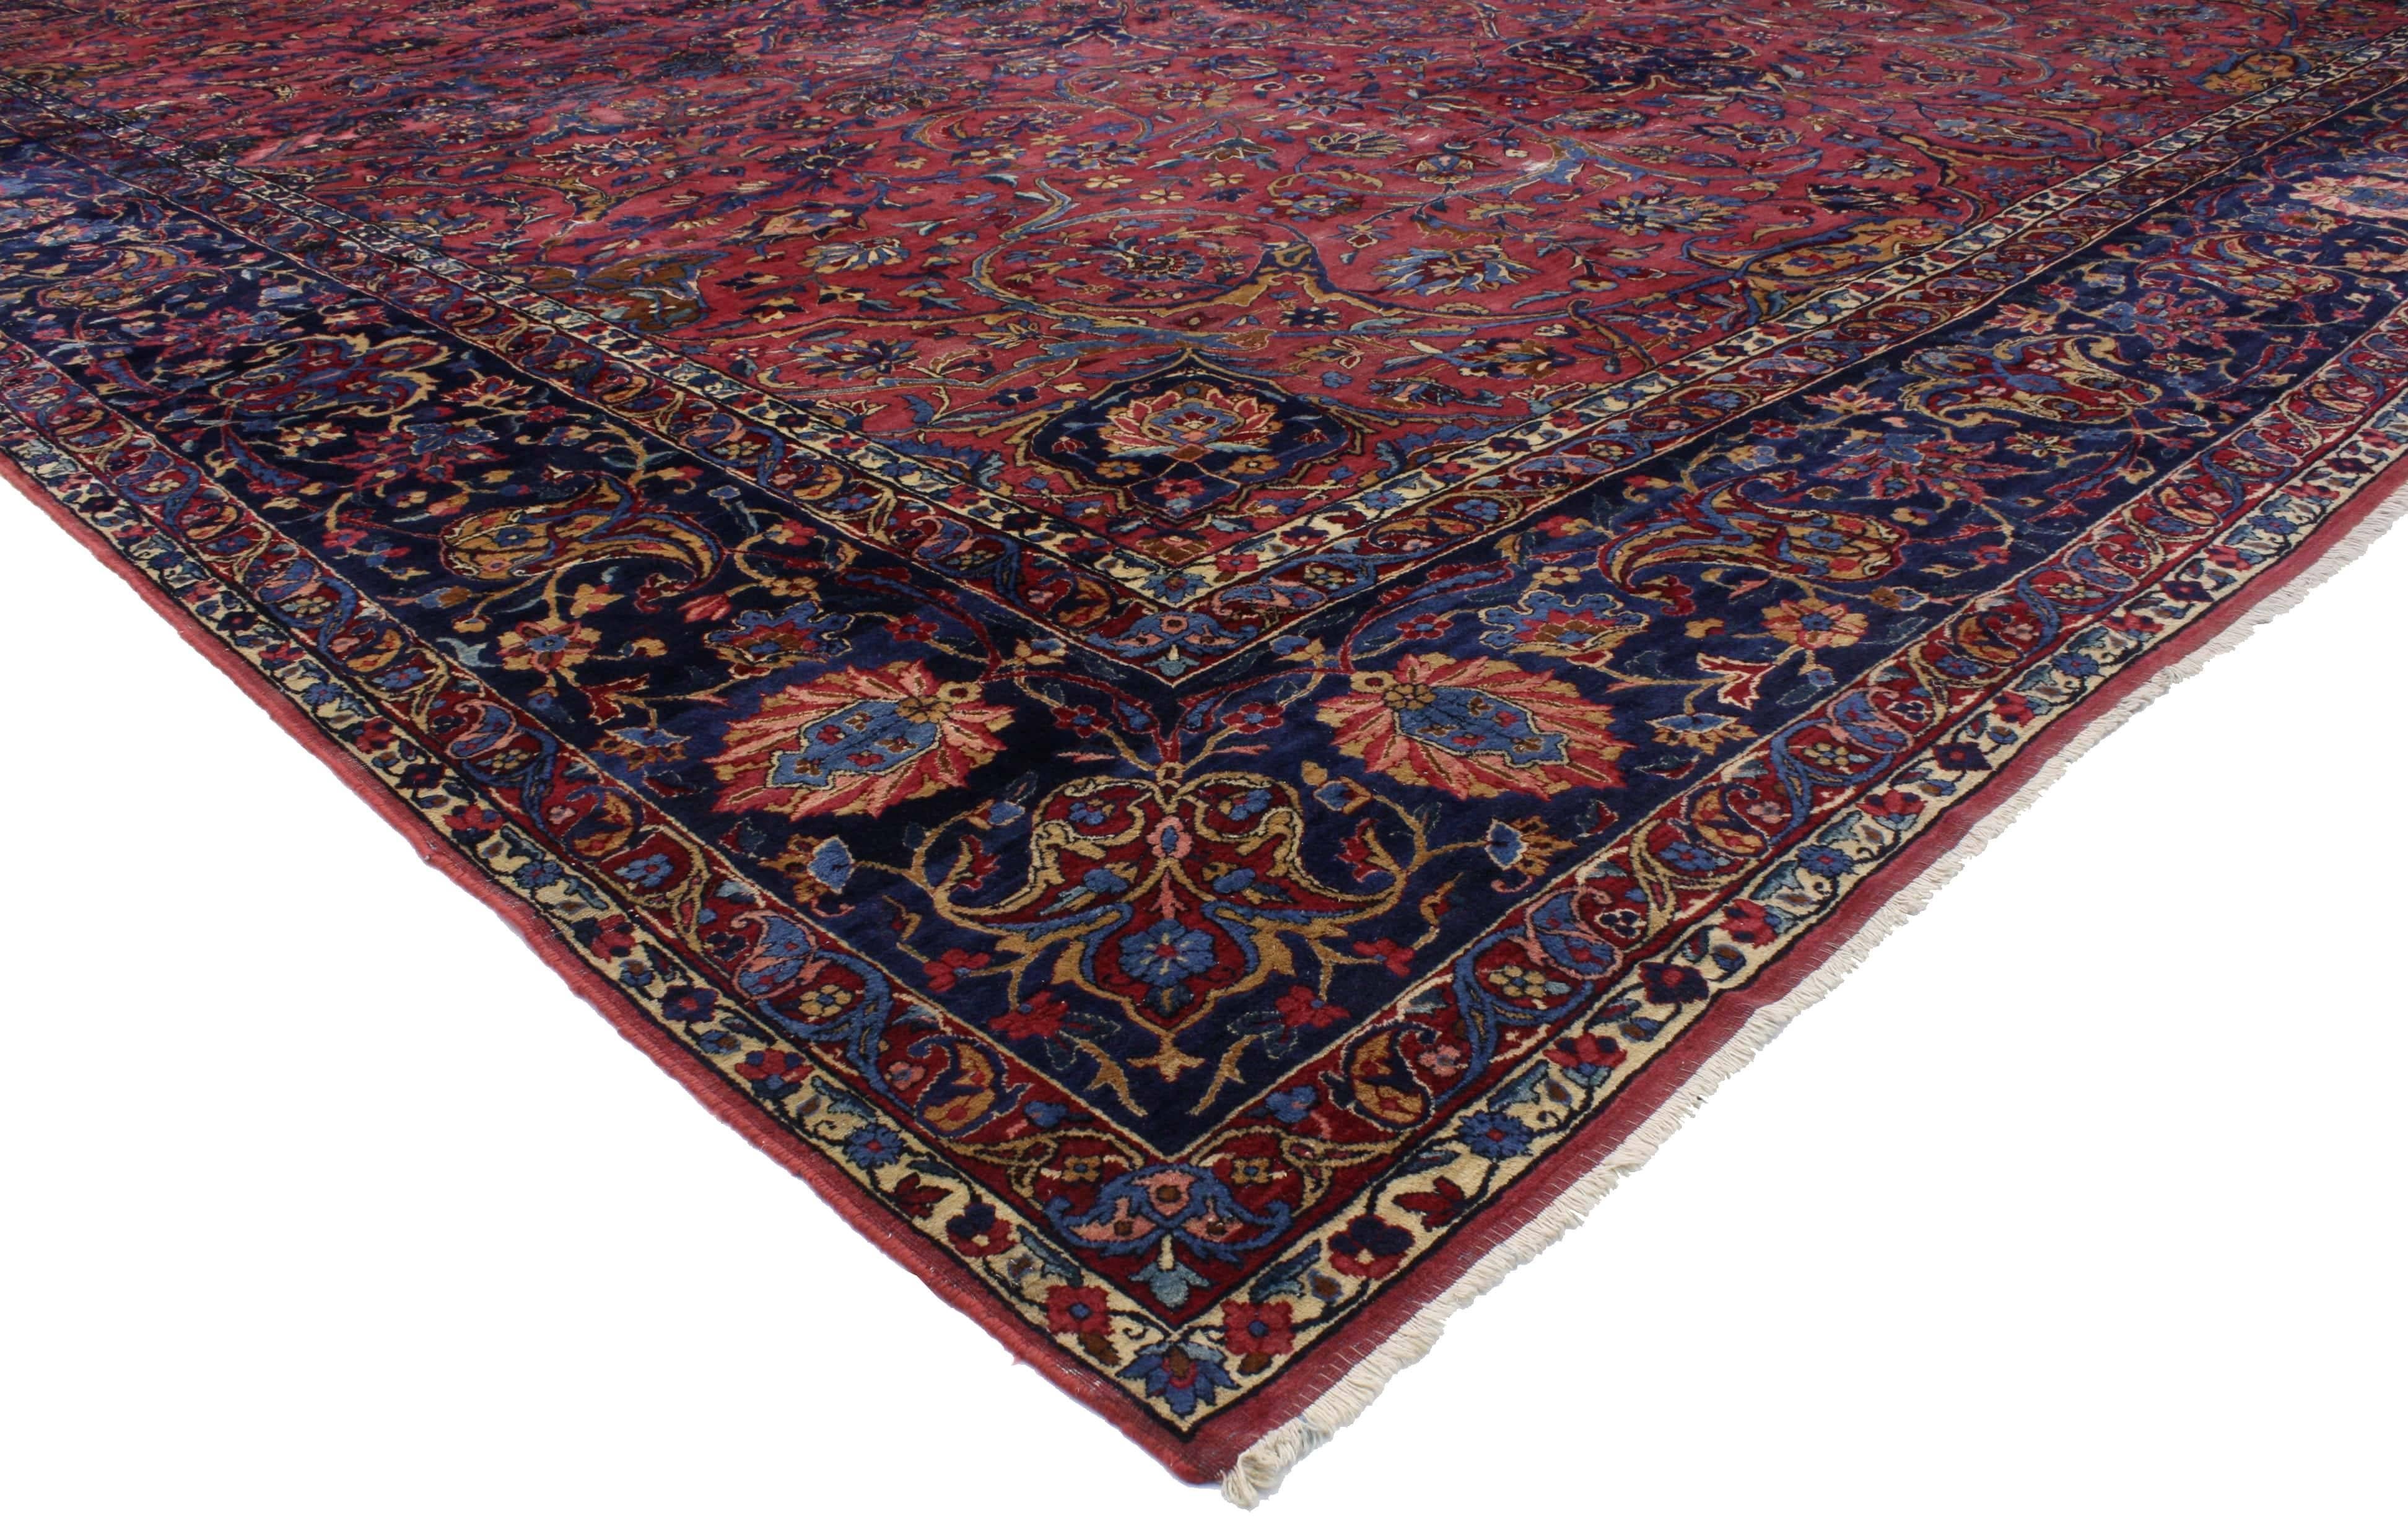 76695 Antique Persian Kerman Rug with Luxe Victorian Regency Style. This highly desirable antique Persian Kerman rug with Art Nouveau style features an impressive all-over floral design rendered in a rich jewel-tone color palette, illuminating its